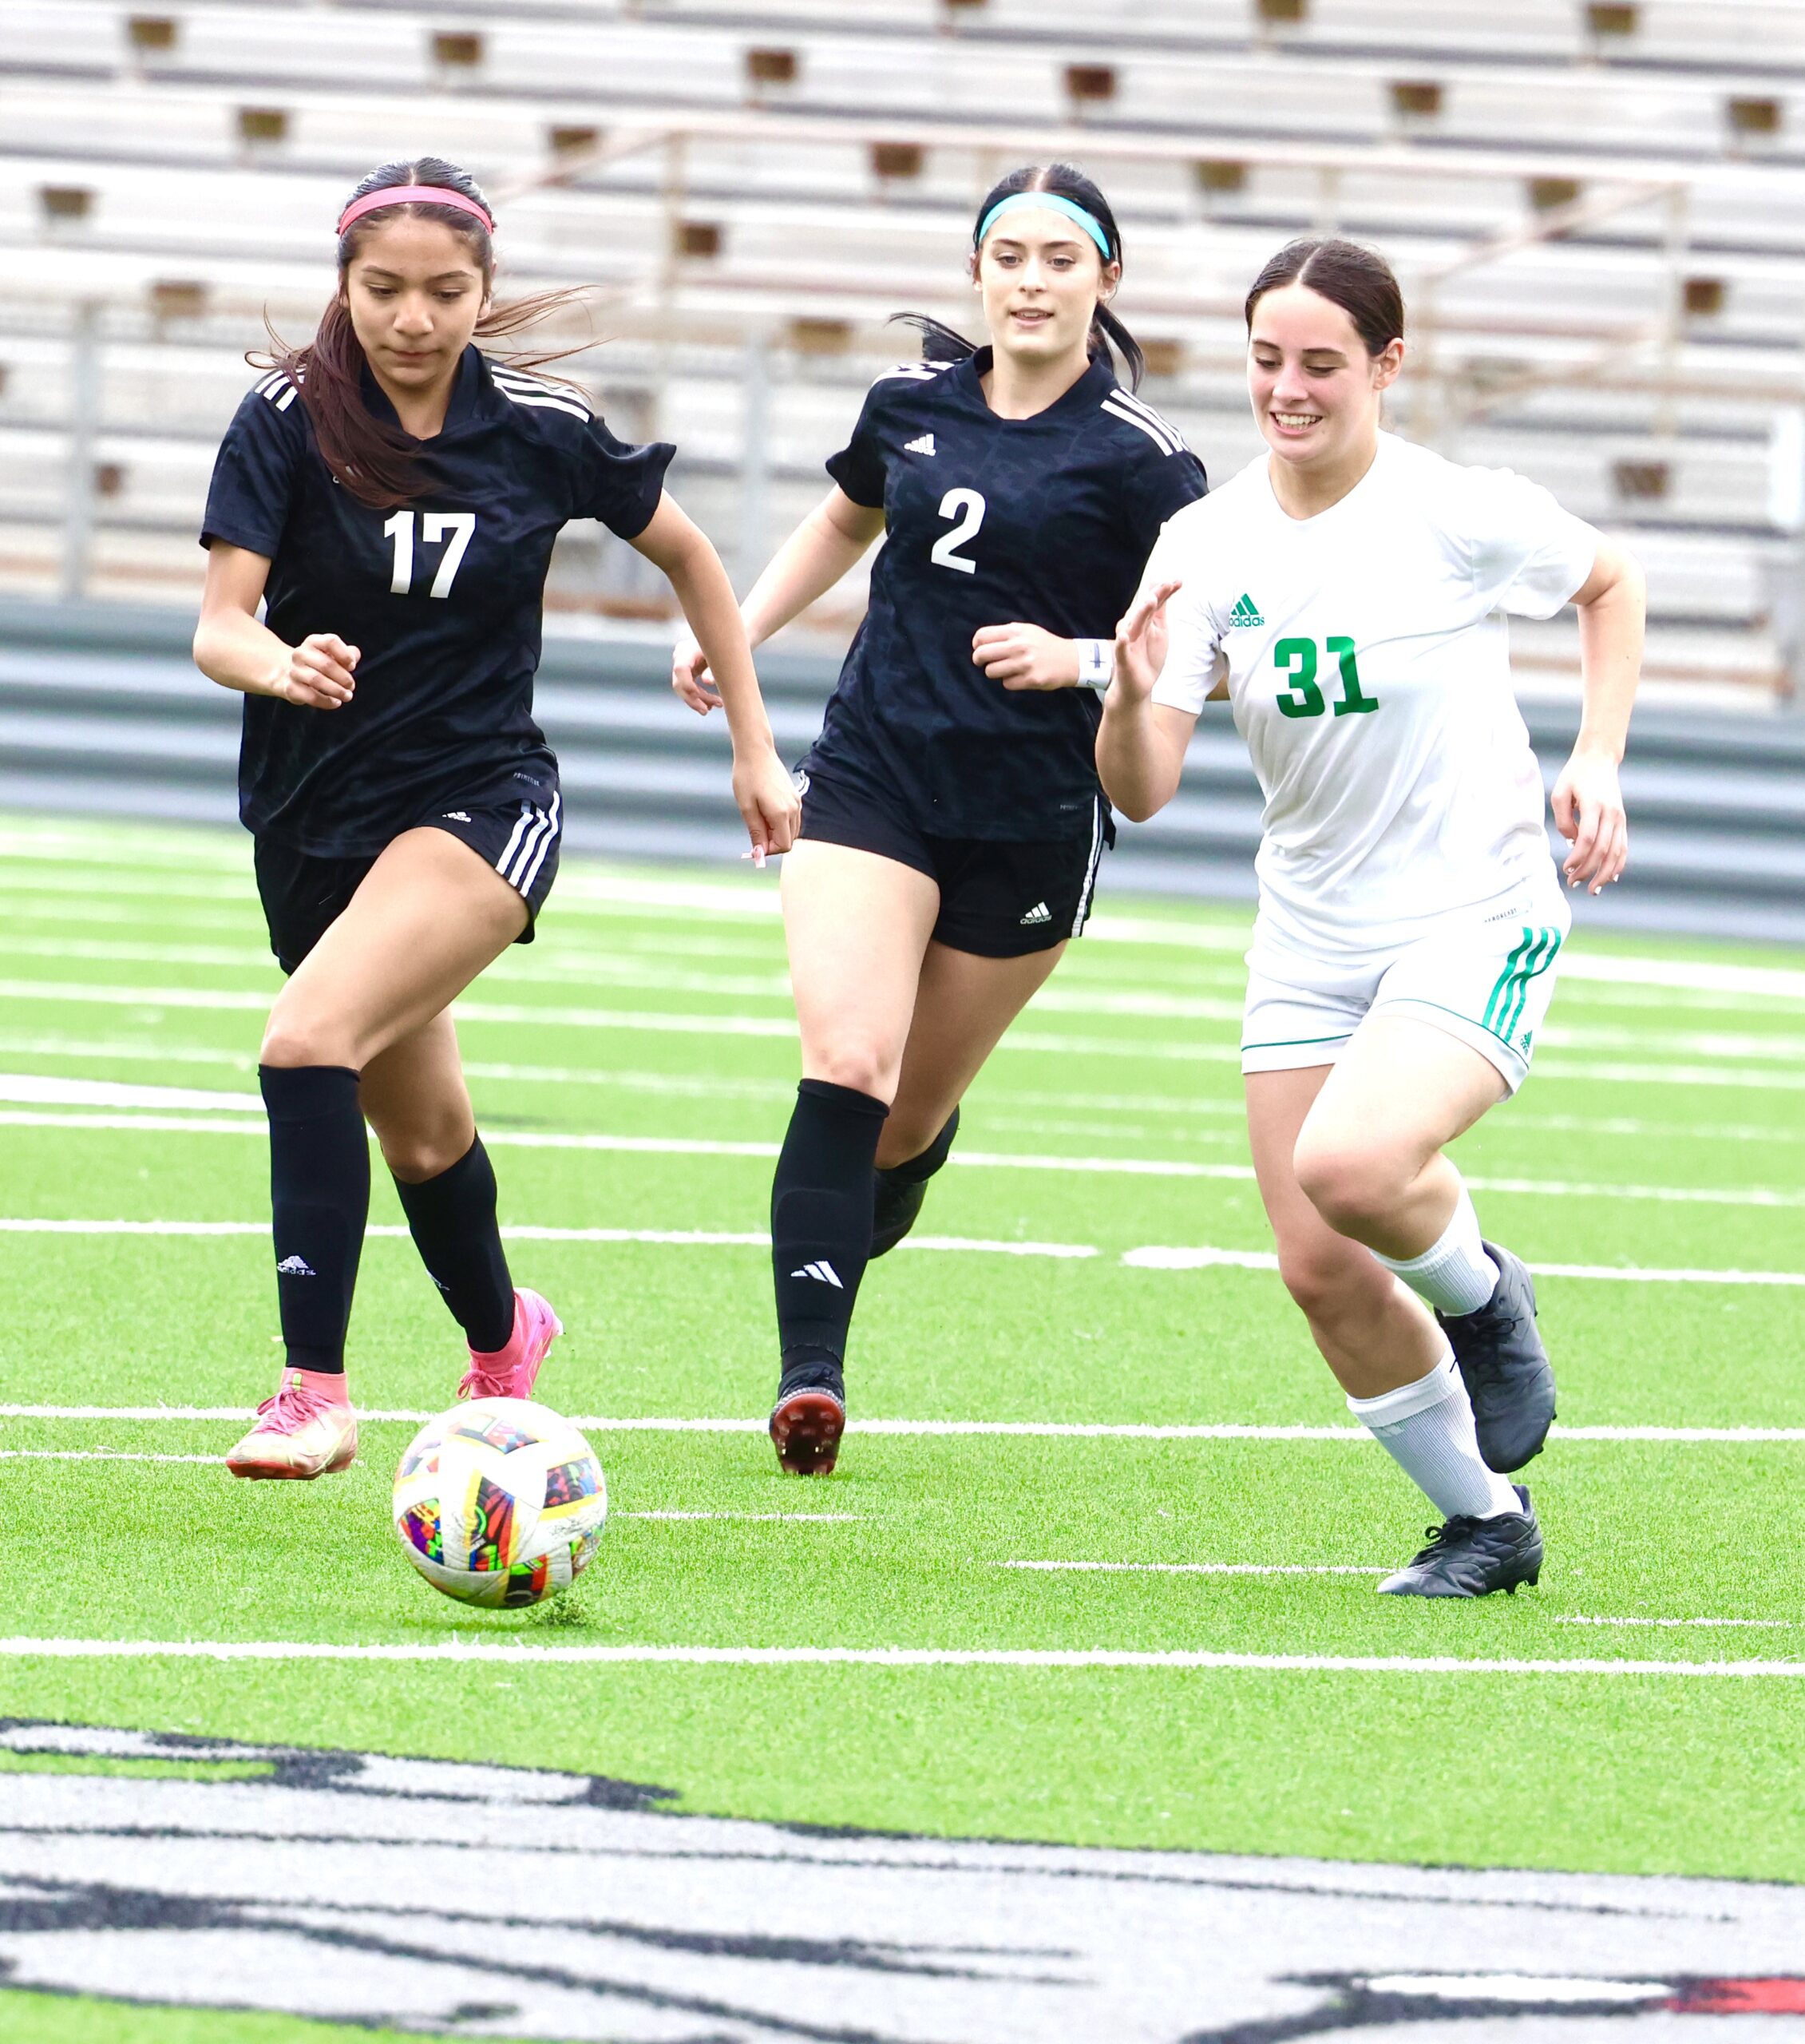 Kilgore's Aliyah Veloz (17) was named co-defensive player of the year as part of the District 15-4A girls All-District Team recently. Sabine's Carol Anguiano (below, inset) was named keeper of the year. (Photo above by DENNIS JACOBS - ETBLITZ.COM; photo below courtesy of SABINE HIGH SCHOOL GIRLS SOCCER)